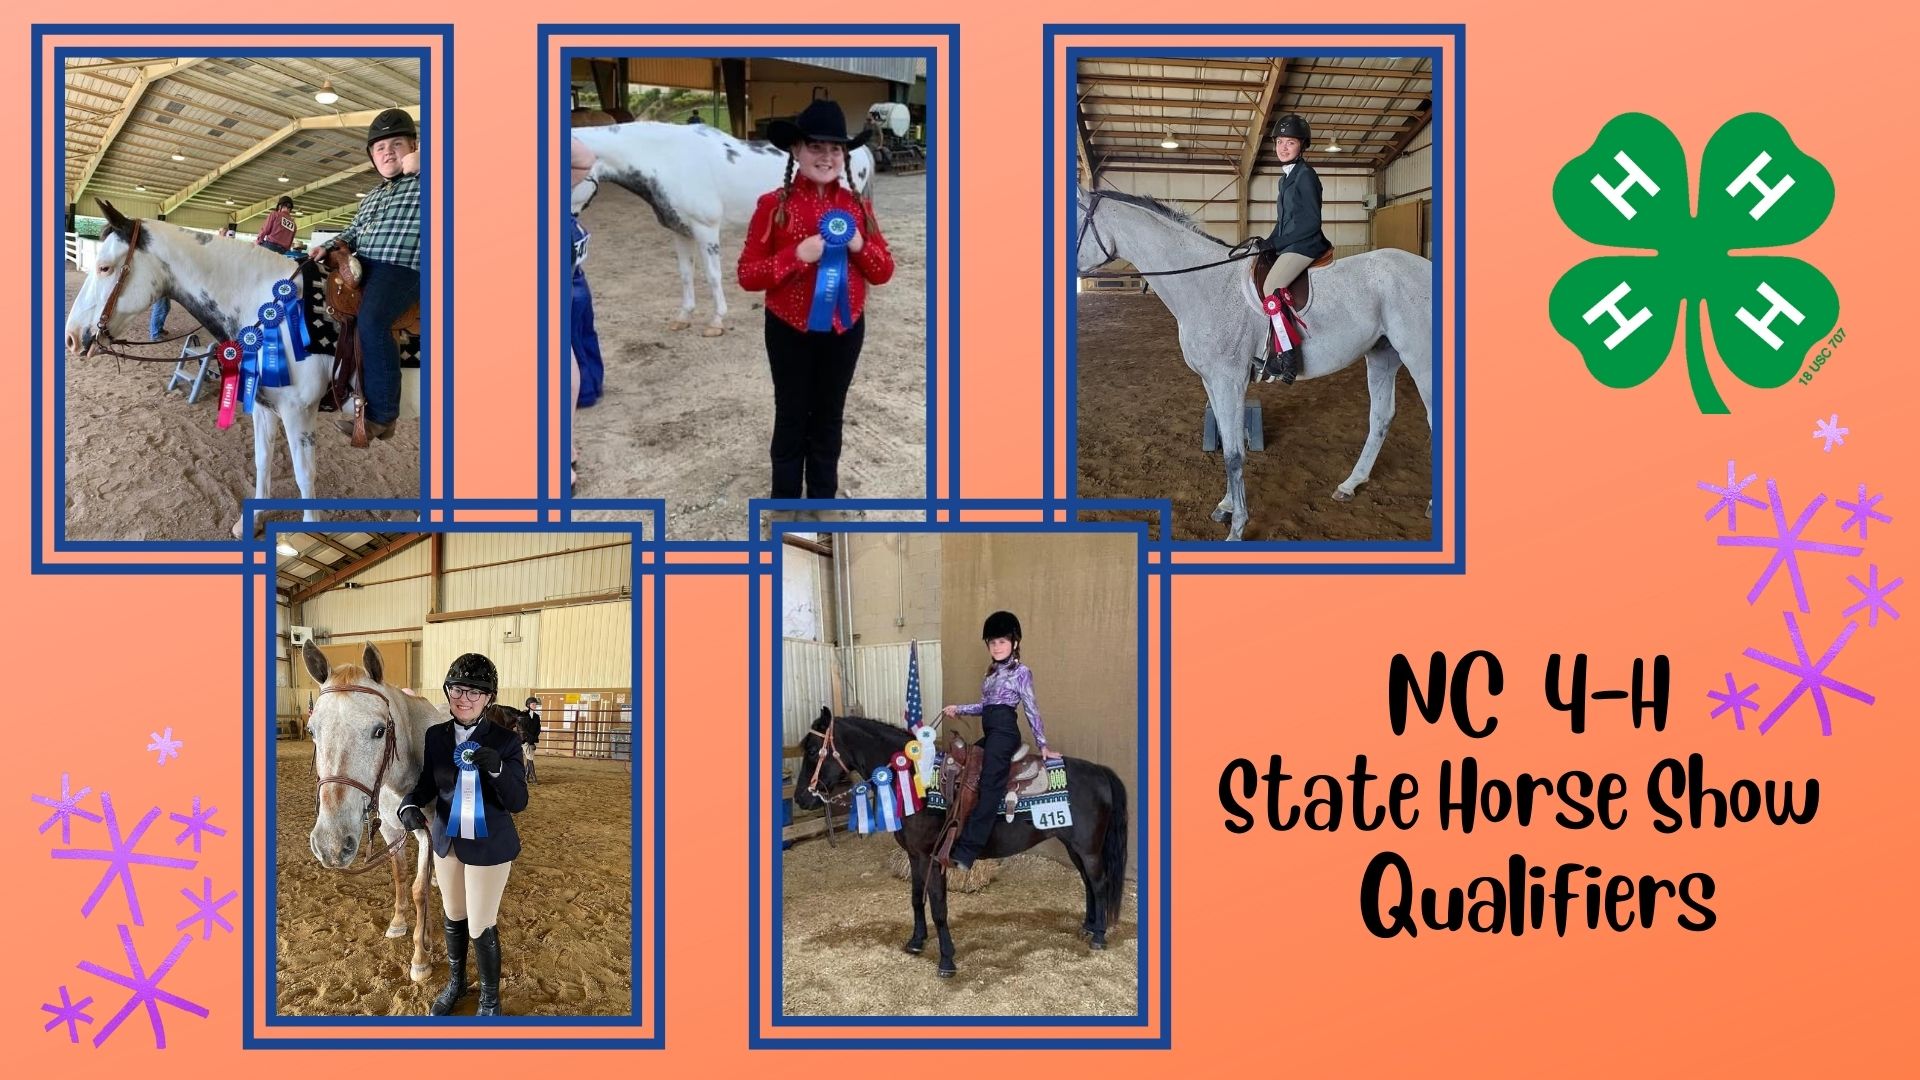 NC 4-H Horse show pictures